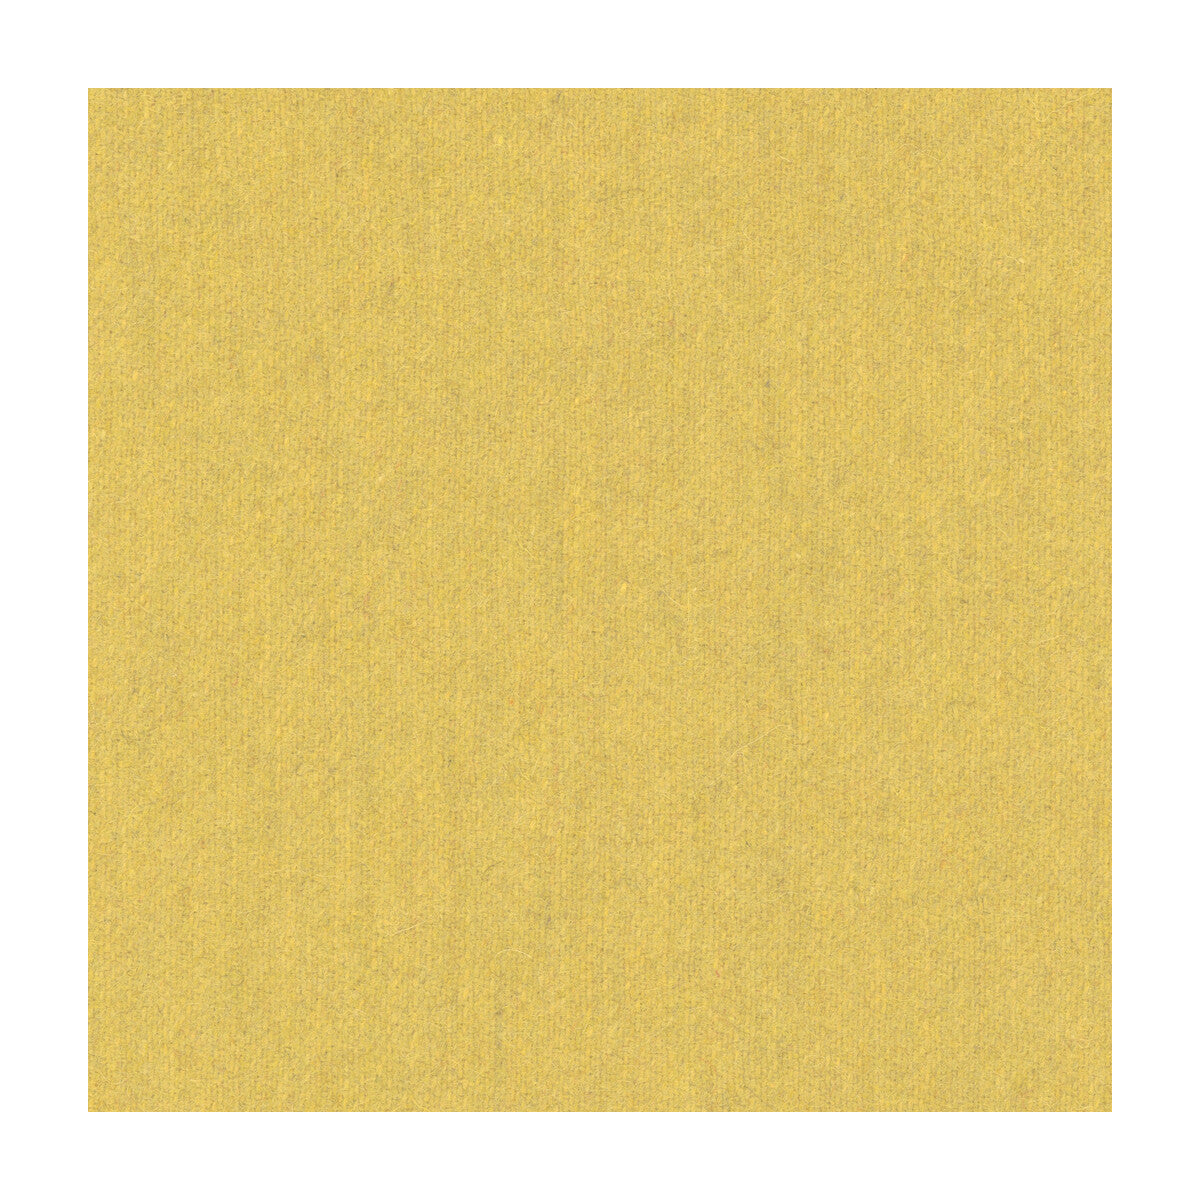 Jefferson Wool fabric in goldenrod color - pattern 34397.4.0 - by Kravet Contract